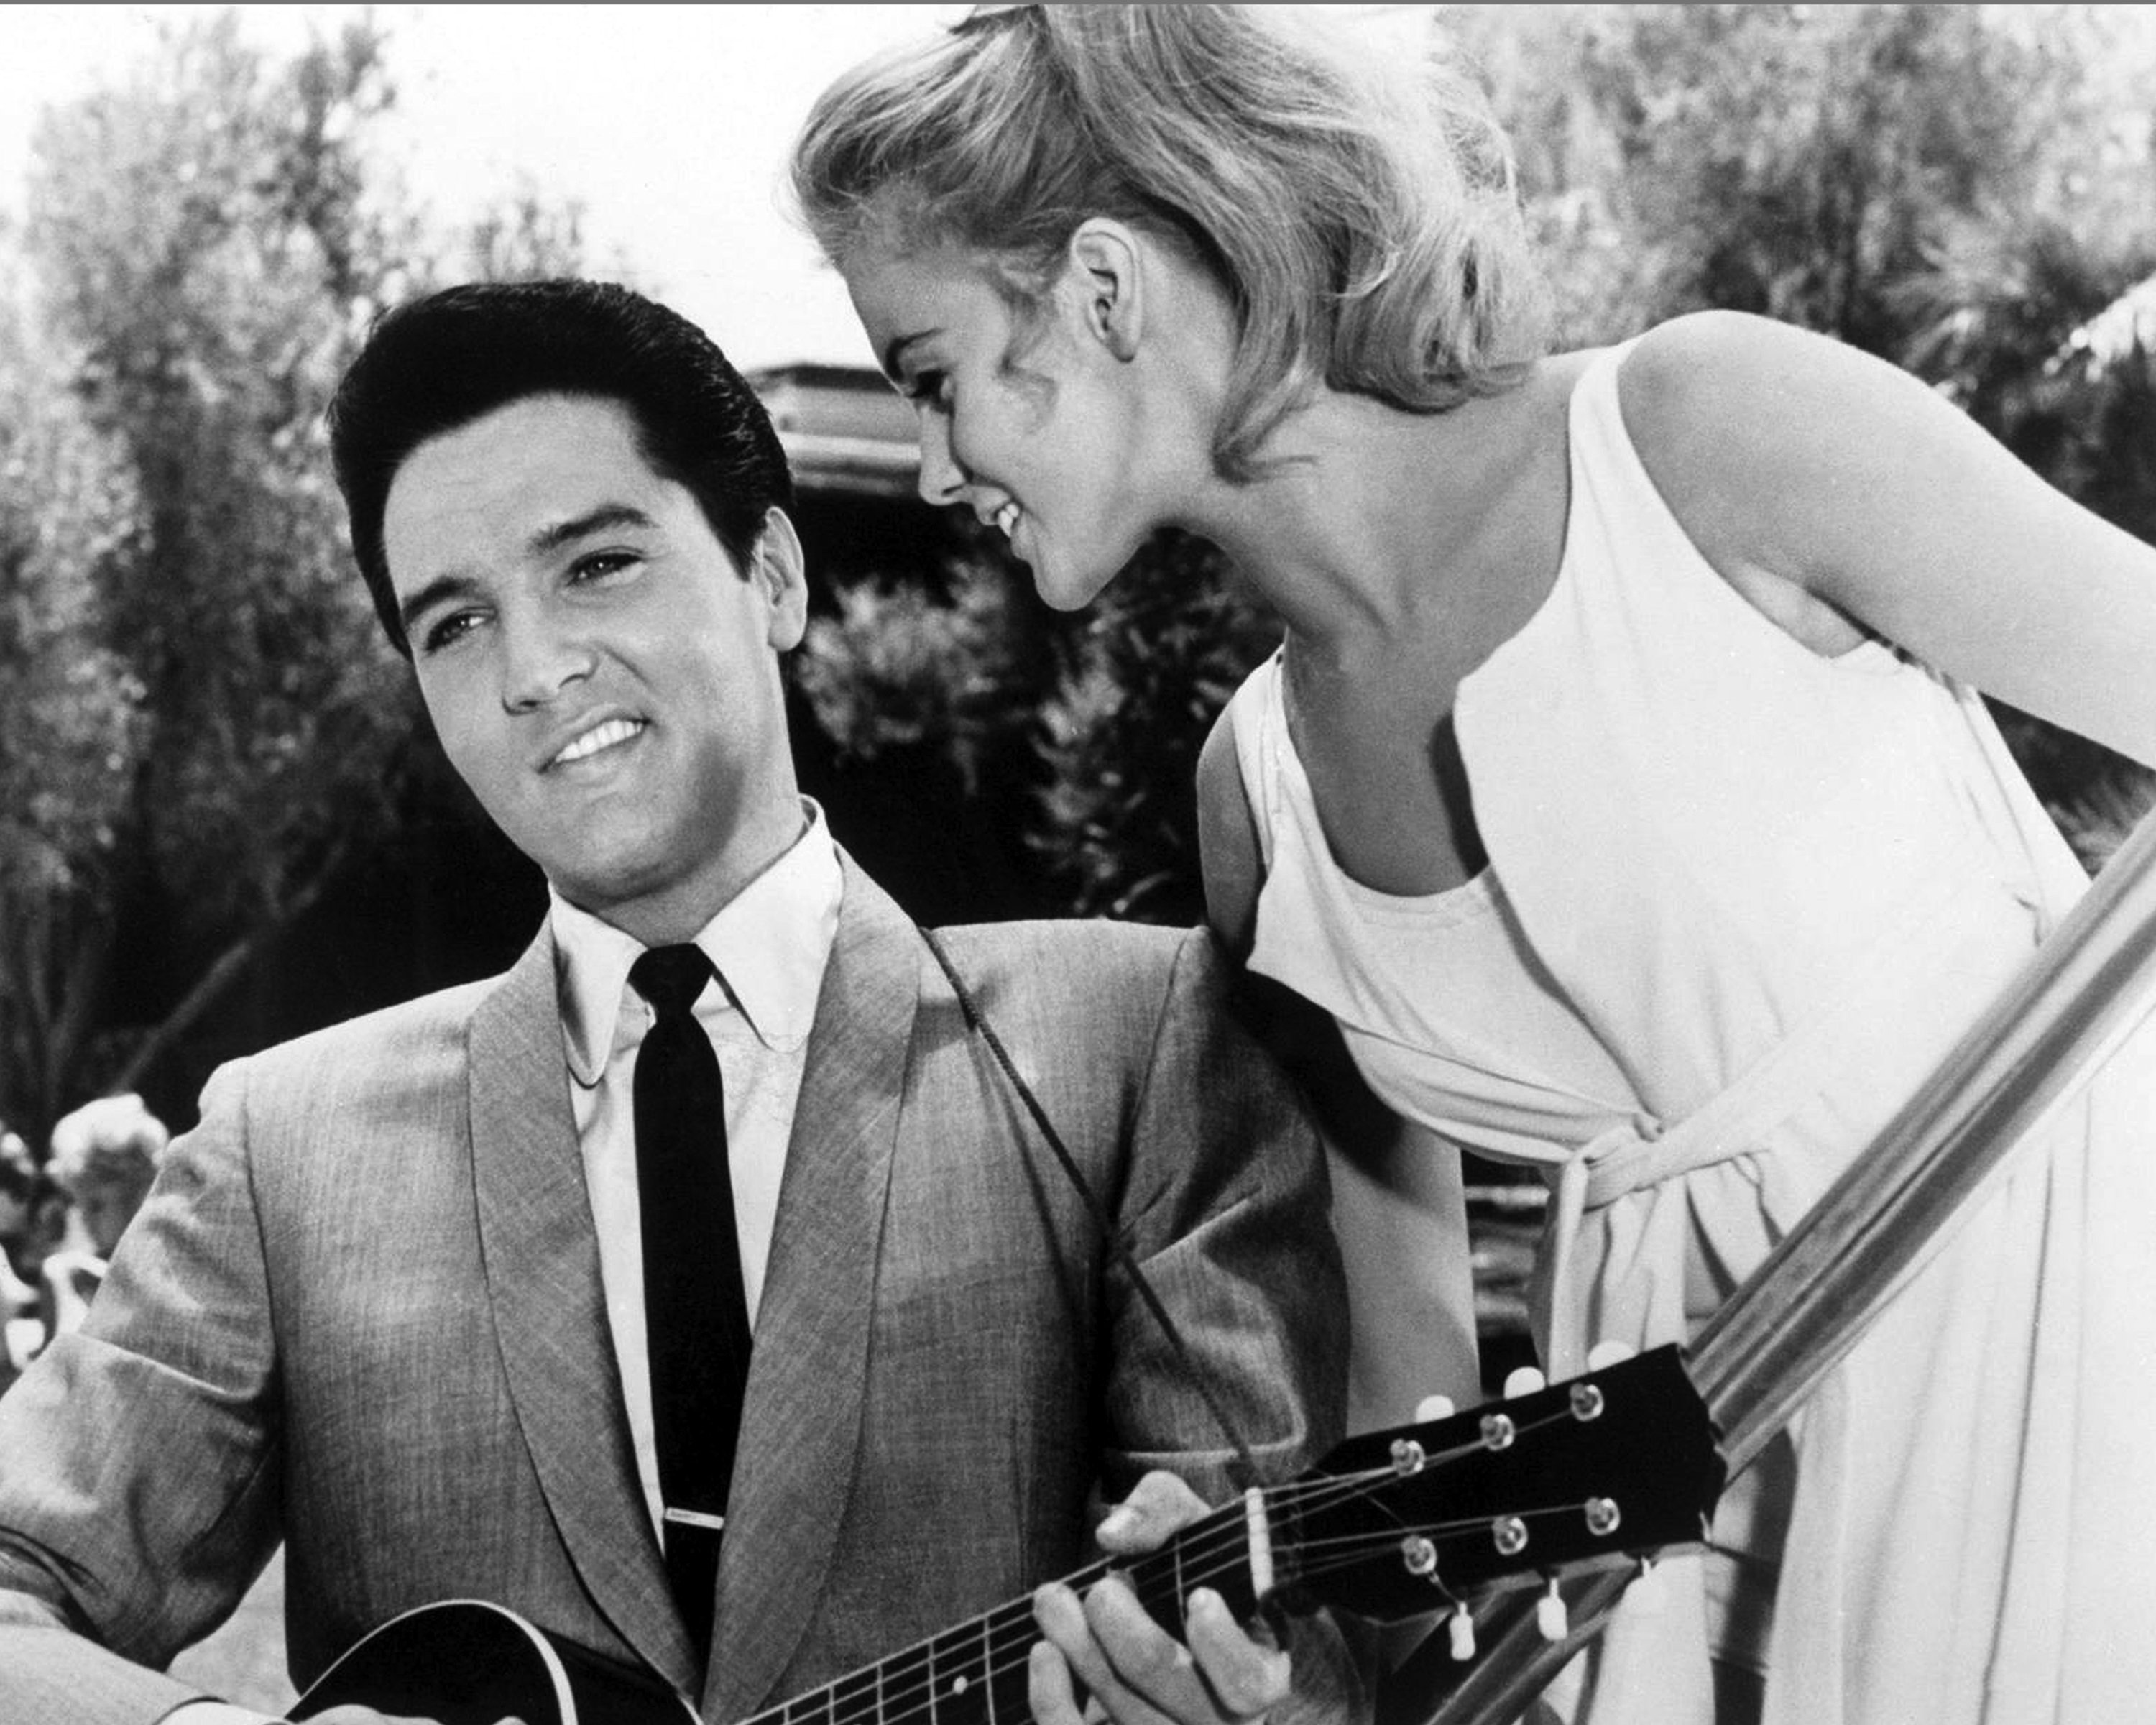 Swedish-American actress Ann-Margret with Elvis Presley (1935 - 1977) in the musical film 'Viva Las Vegas', directed by George Sidney, 1964.